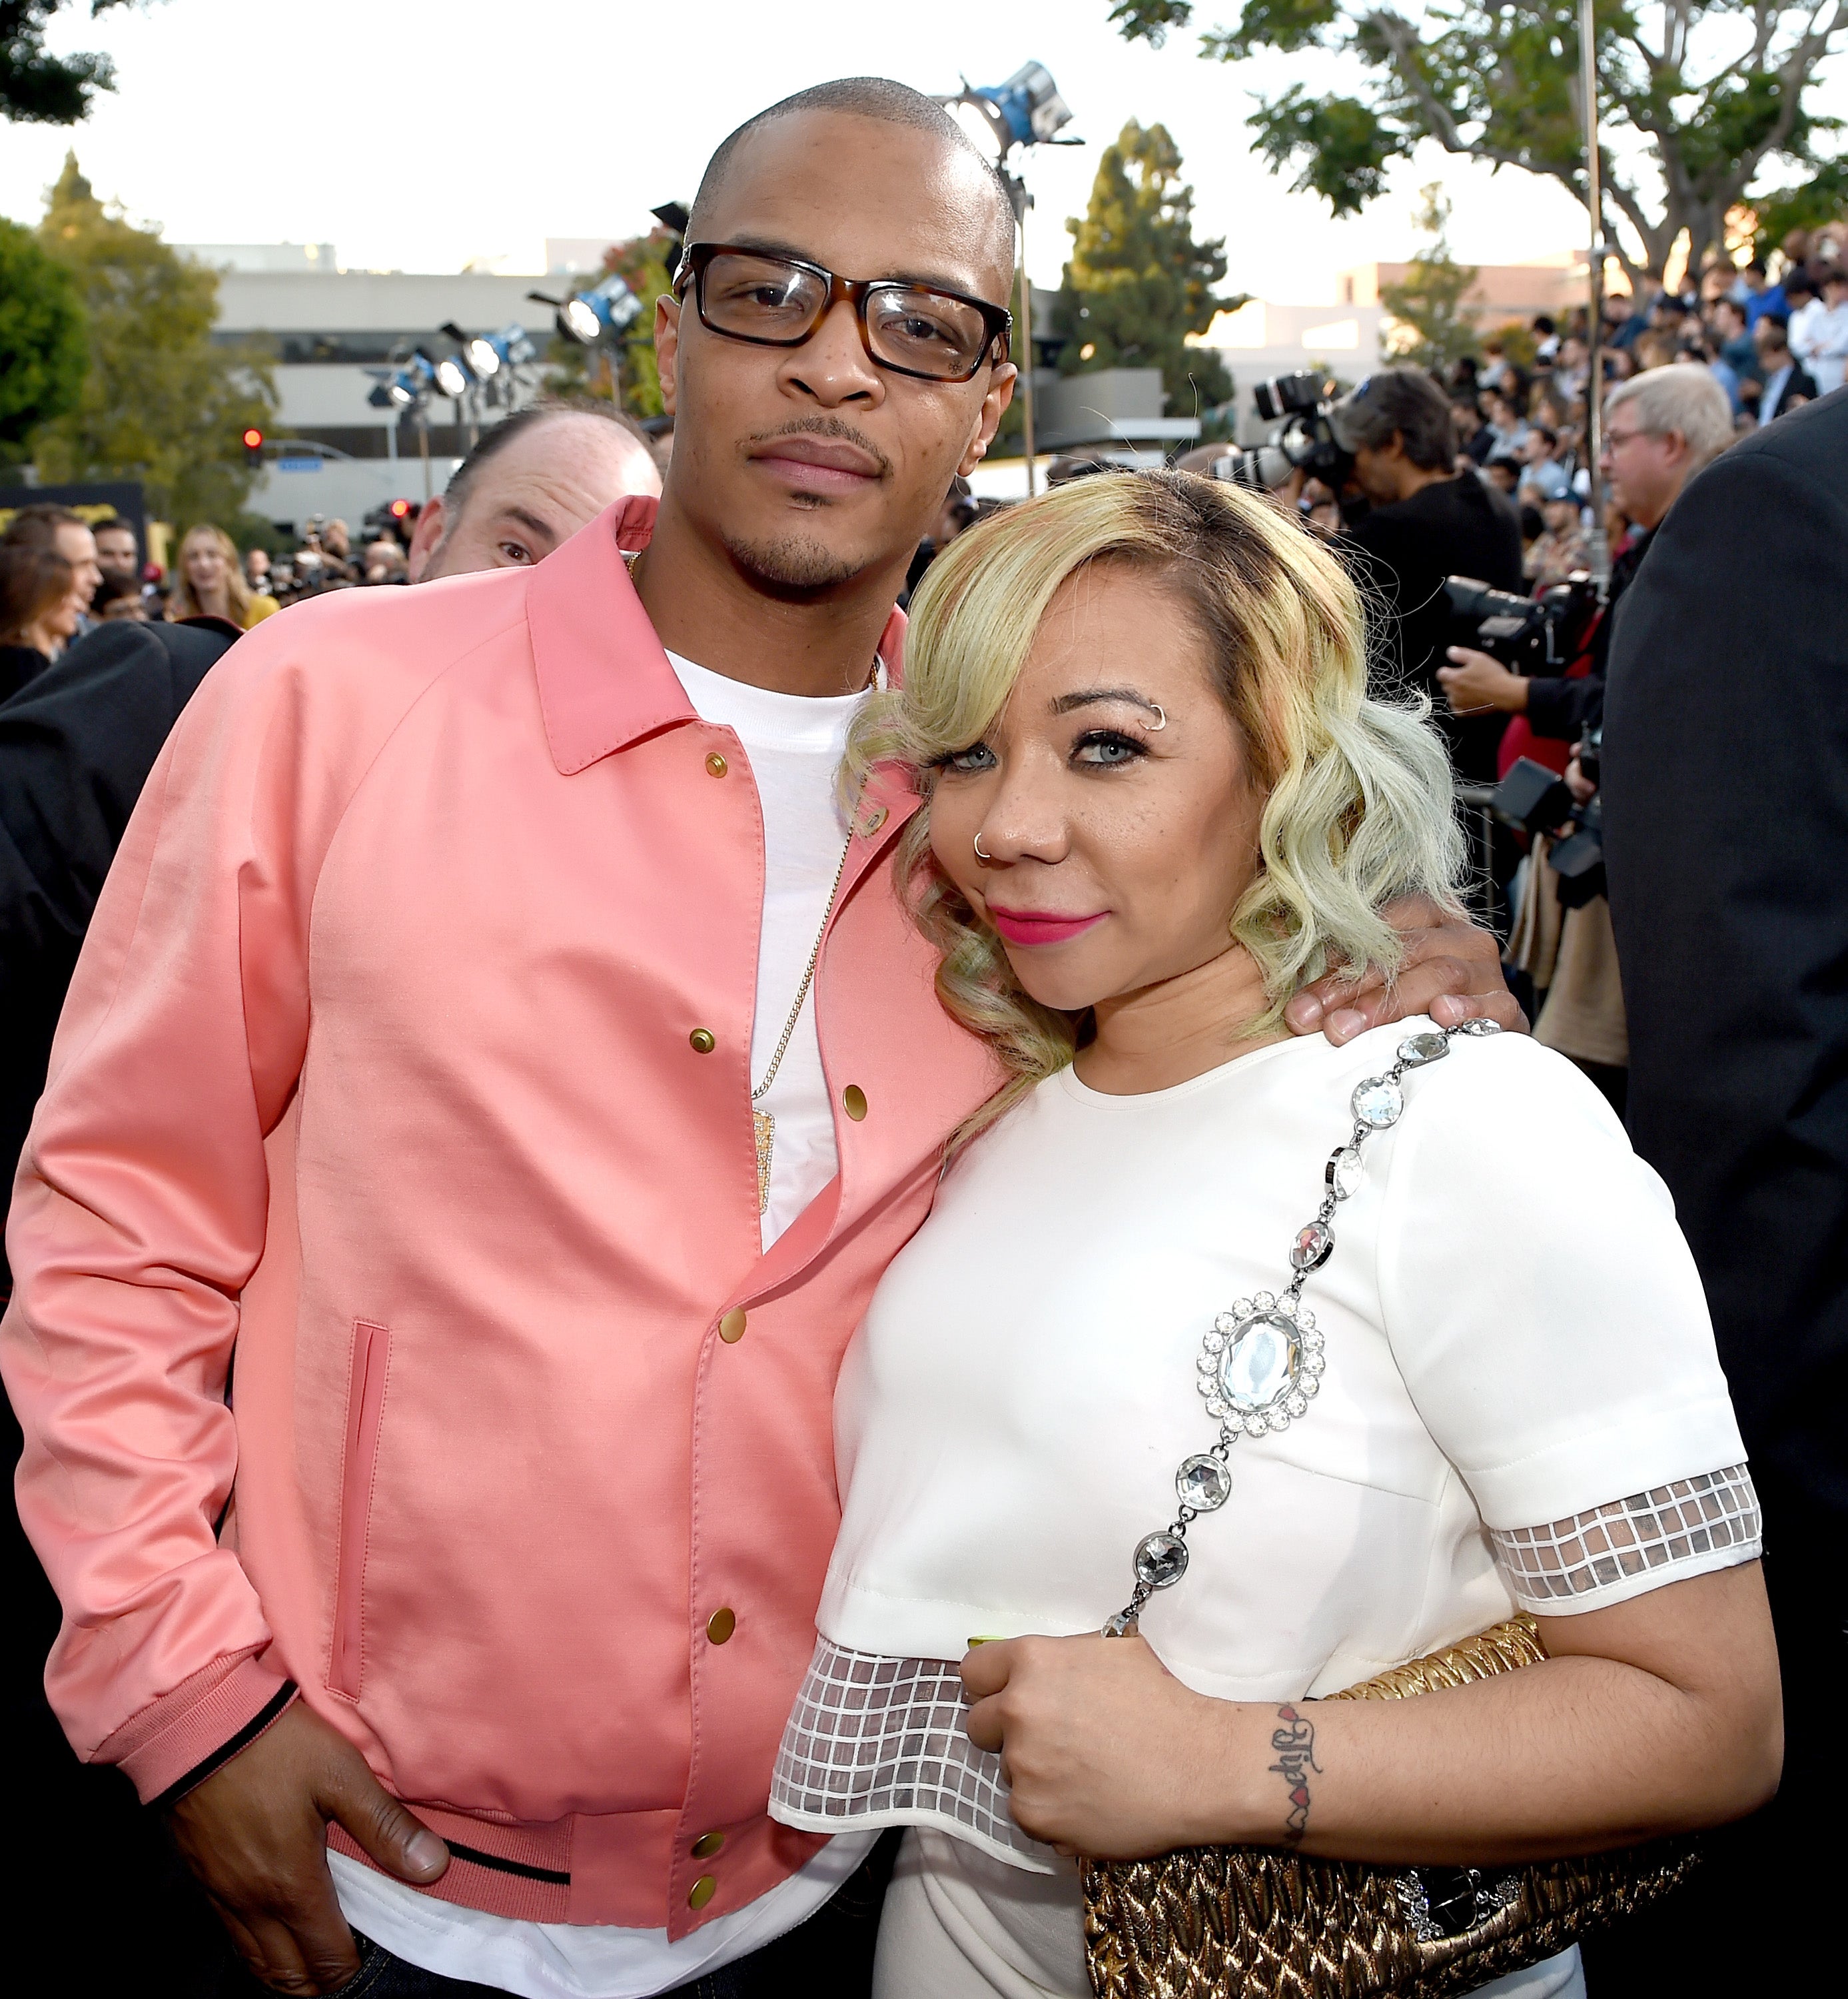 T.I and Tiny During Happier Times
